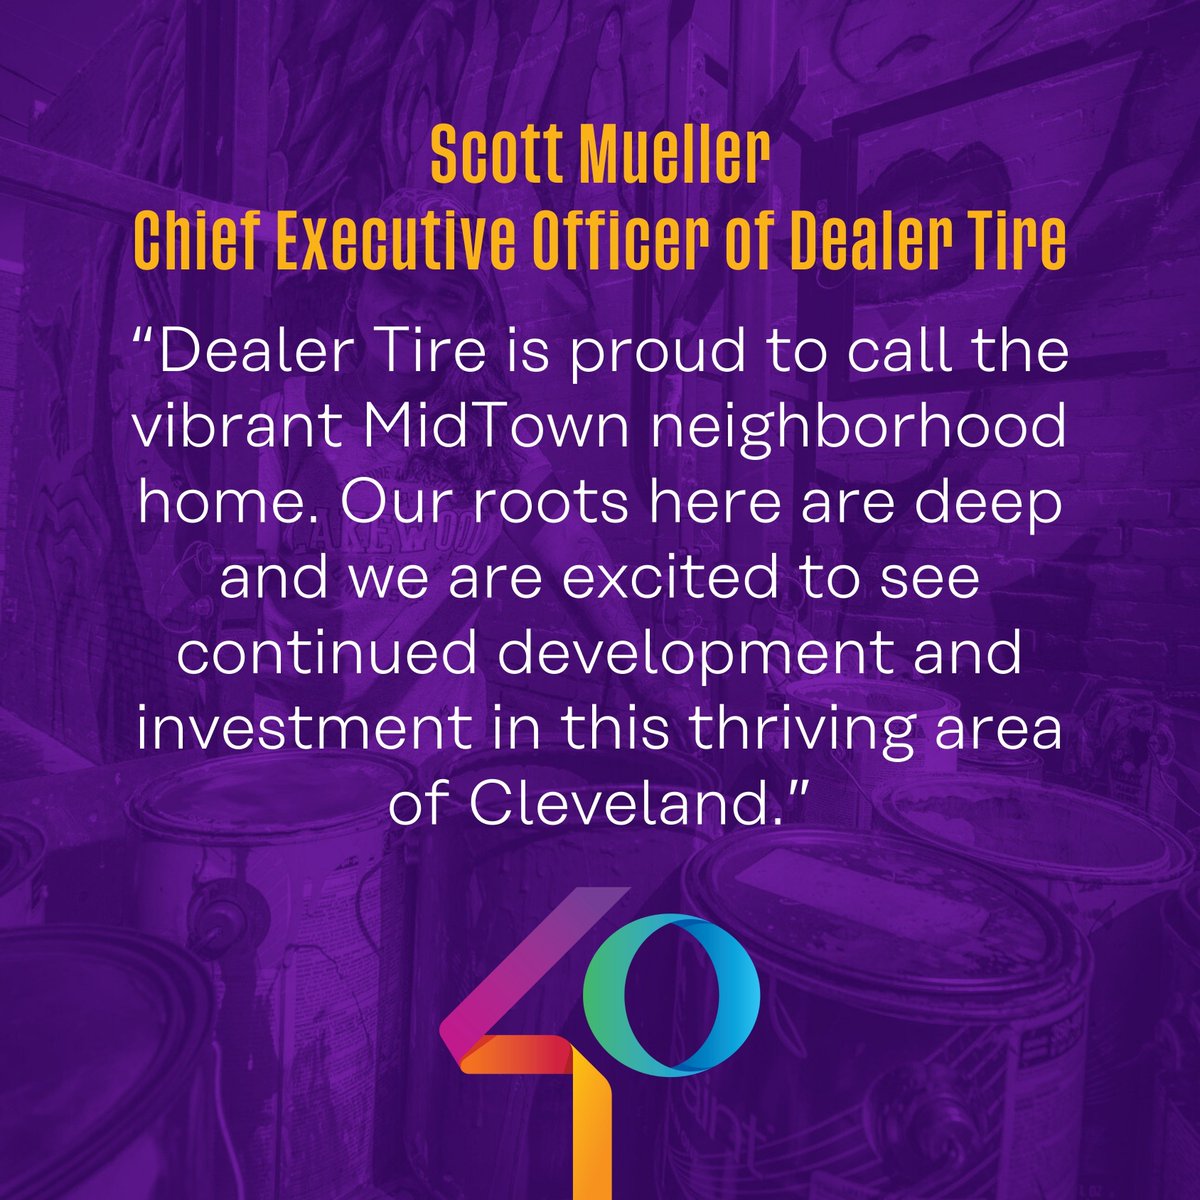 MidTown Member Highlight: Dealer Tire @dealertirecle has been in the tire business for more than 100 years, and has called MidTown home ever since its inception. Today, the company has more than 5,000 associates. Interested in becoming a member? Visit midtowncleveland.org/membership/